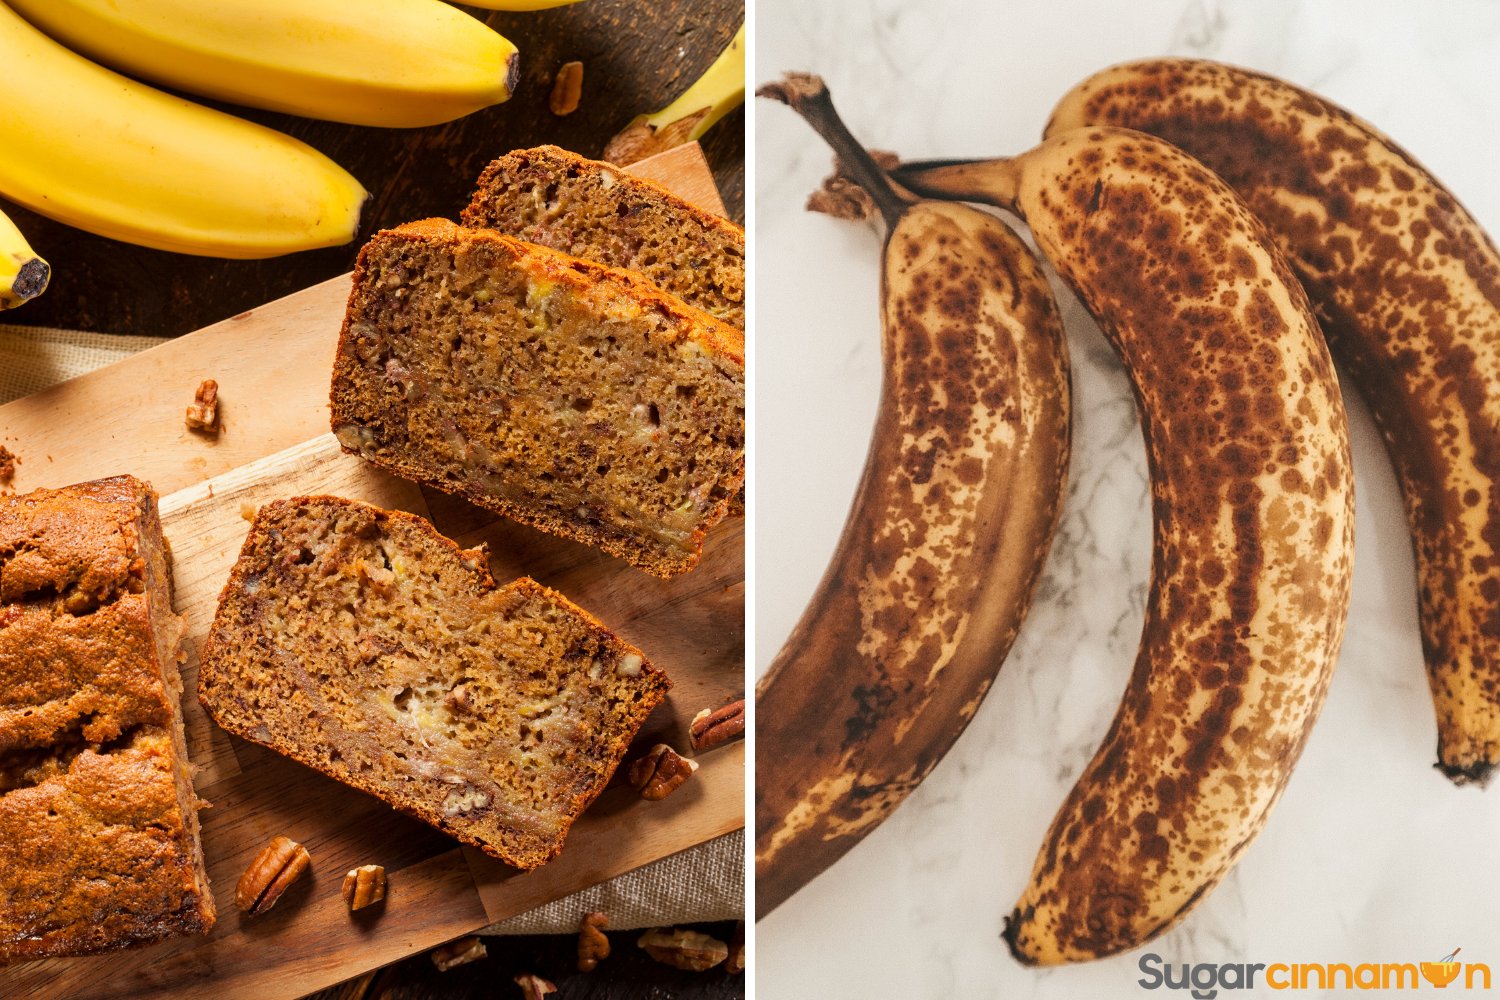 How Ripe Do Bananas Have to Be For Banana Bread